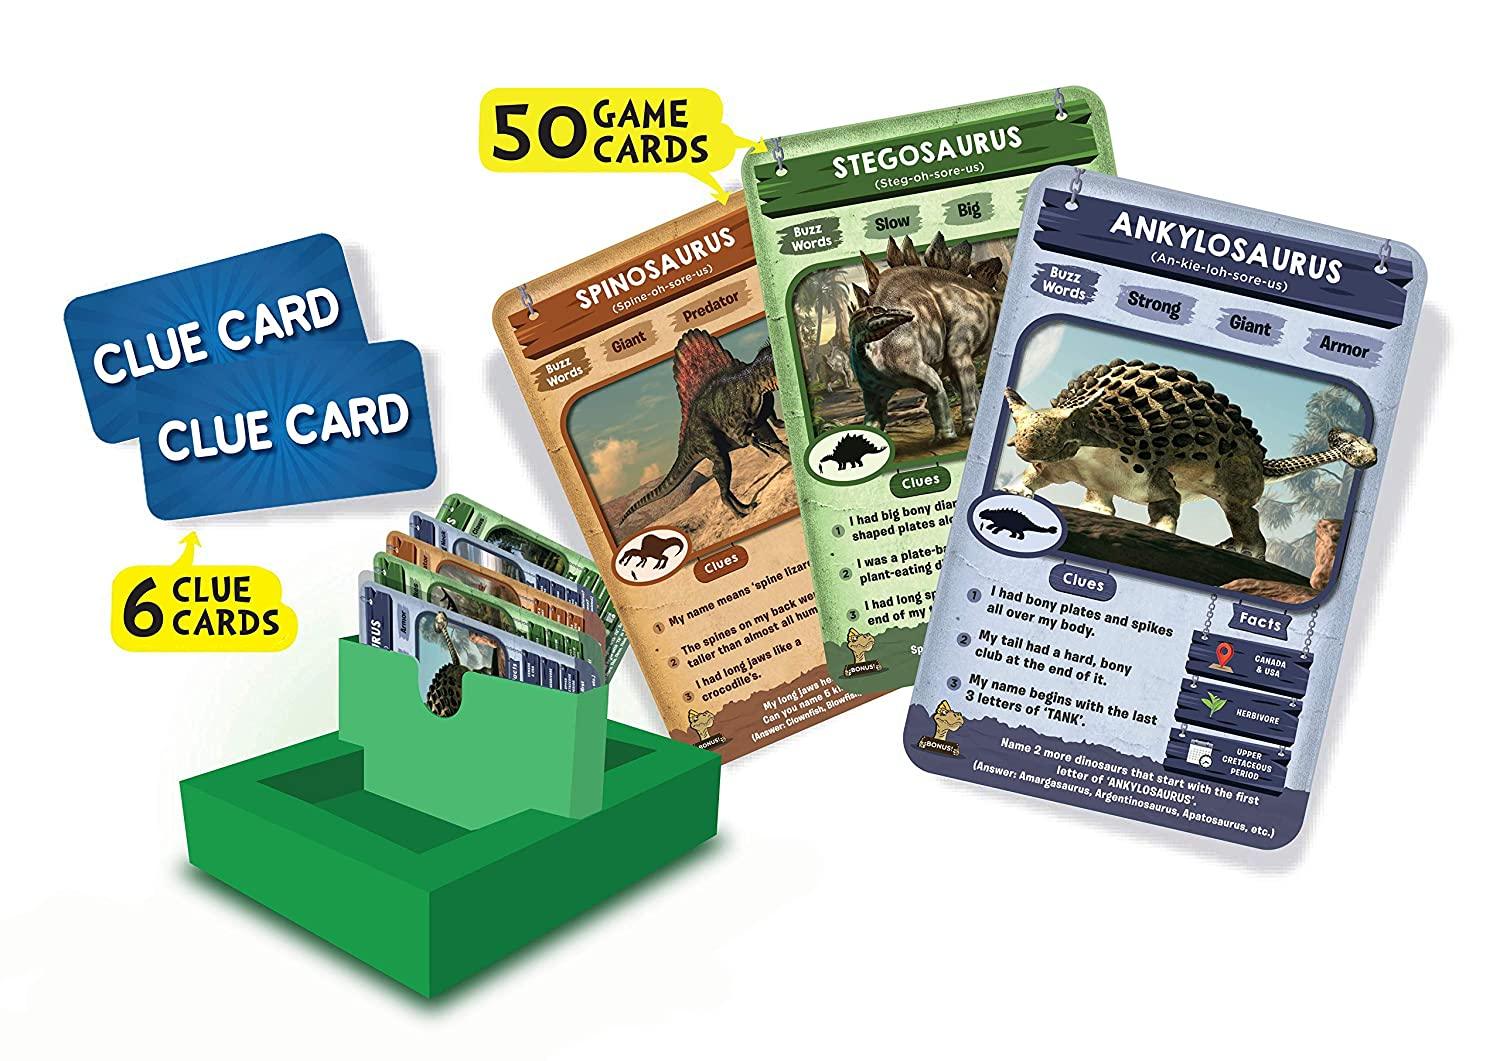 Skillmatics Deadly Dinosaurs - Guess In 10 (Ages 8-99) | Card Game of Smart Questions | General Knowledge for Families | Gifts for Girls and Boys